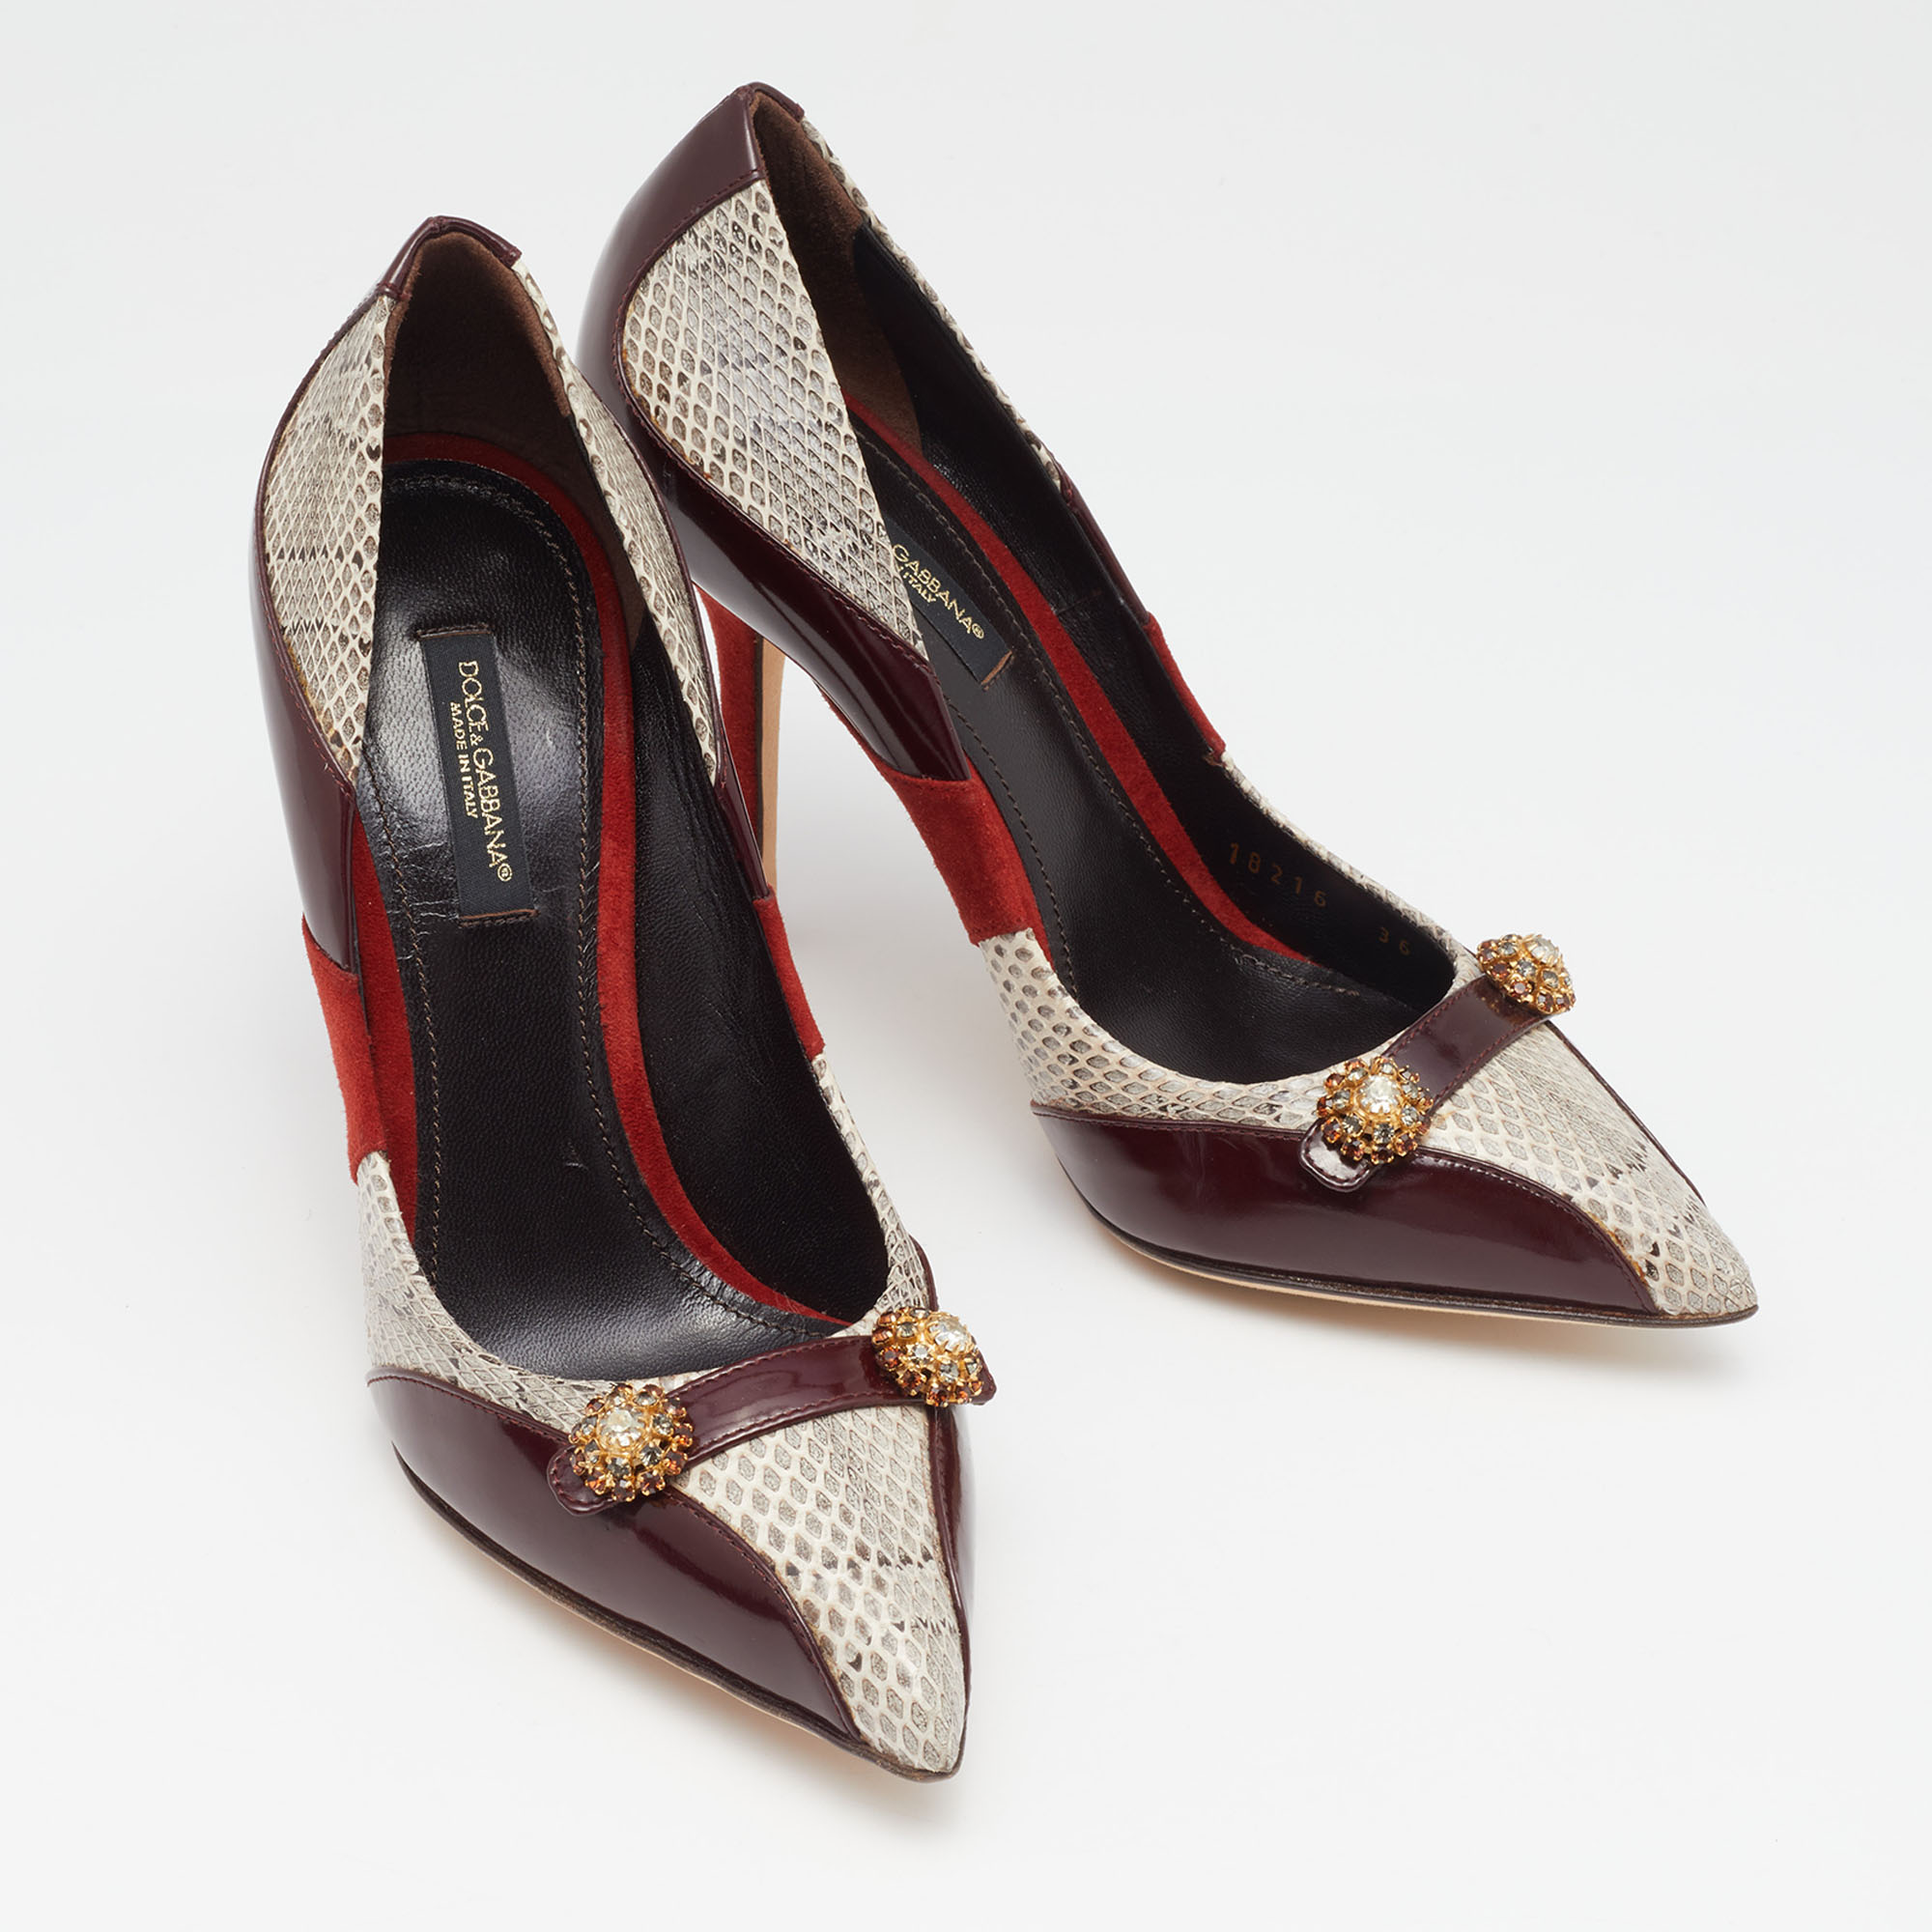 Dolce & Gabbana Tricolor Suede And Watersnake Pointed Toe Pumps Size 36